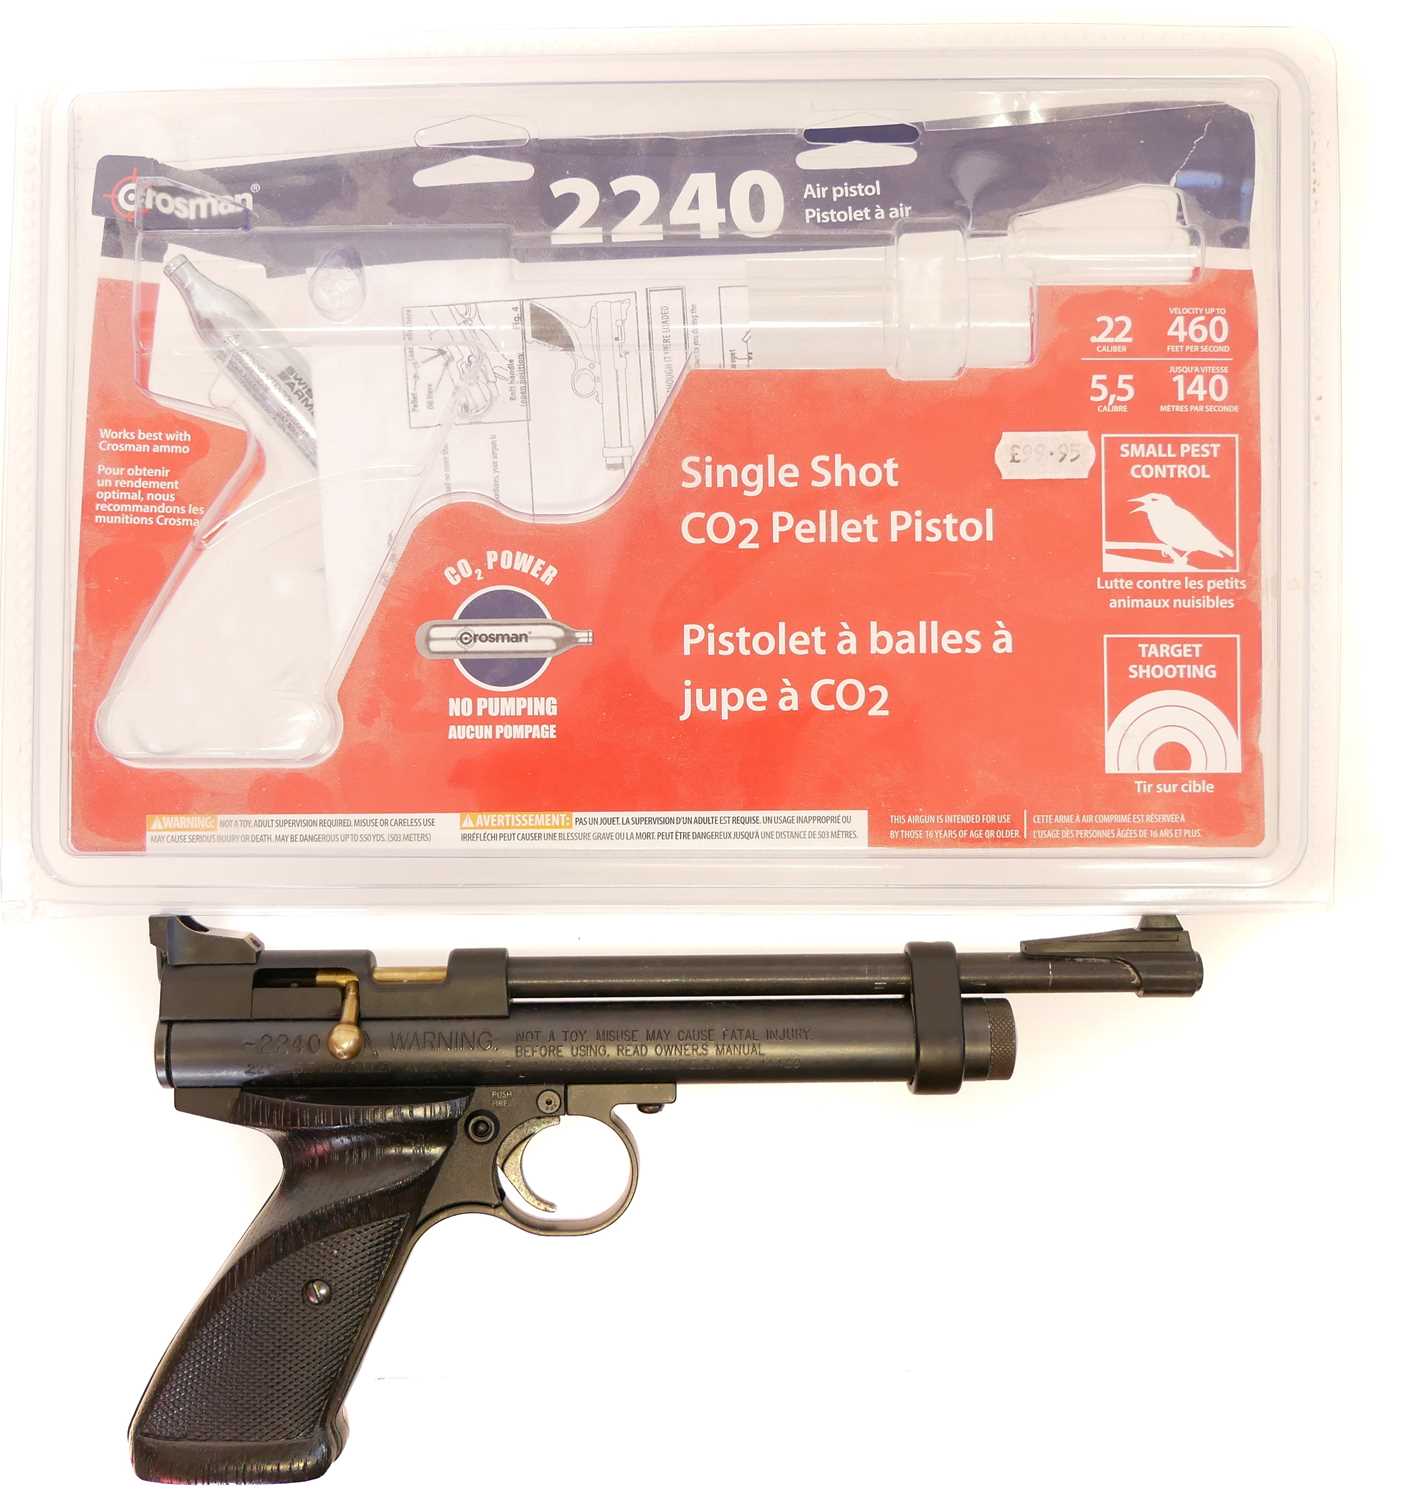 Crossman 2240 .22 CO2 Air Pistol with packaging and one CO2 canister